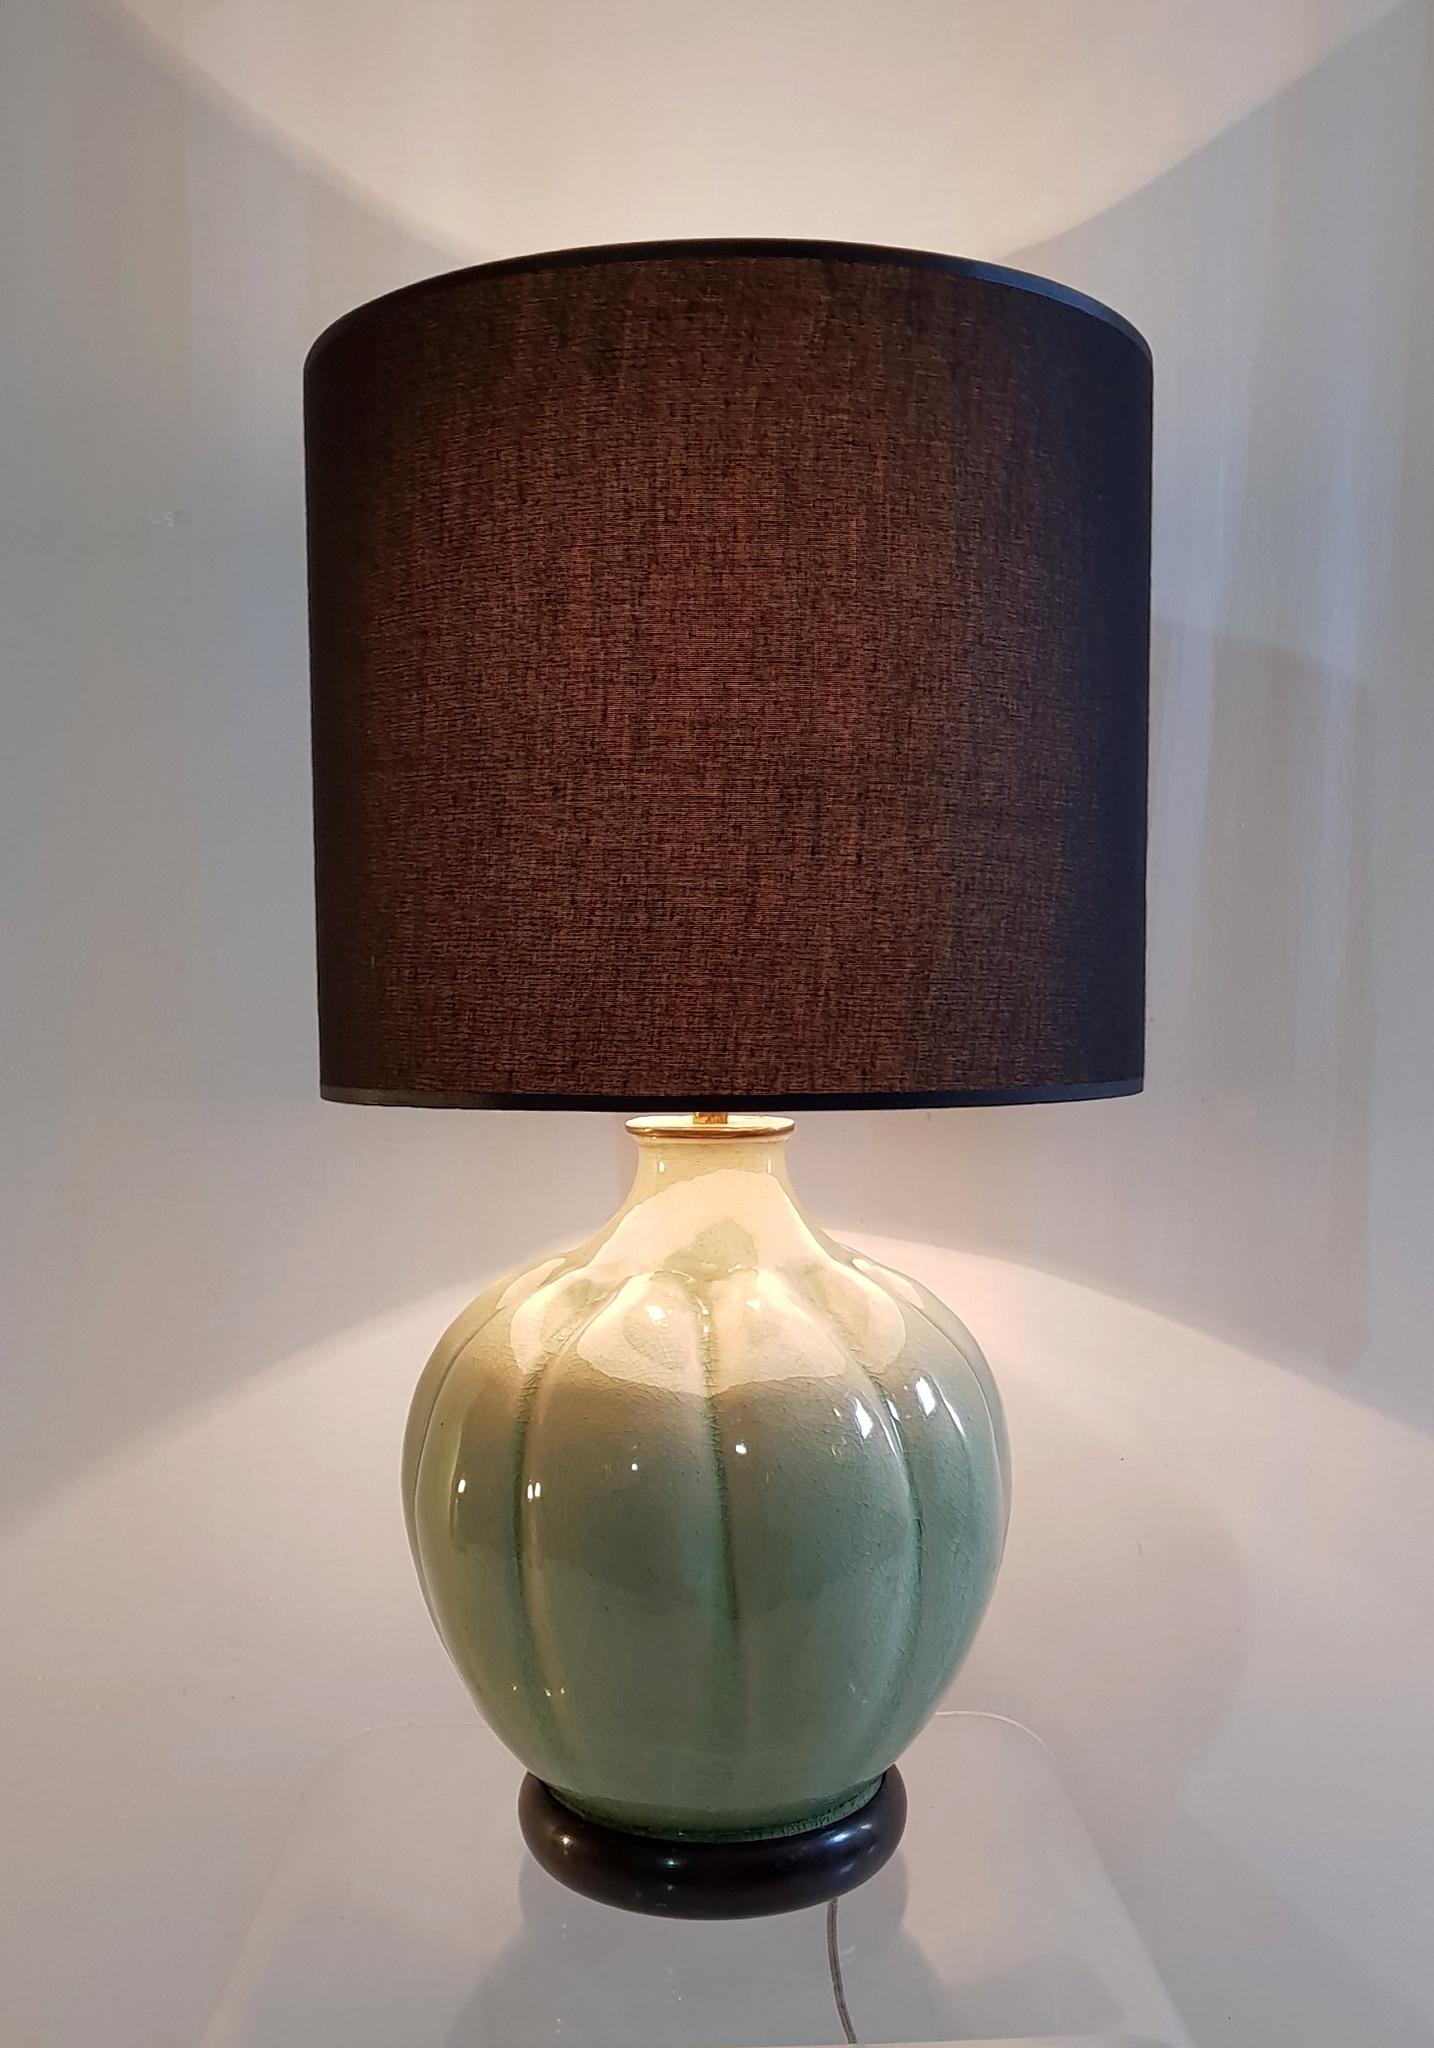 Table lamp in celadon green porcelain with an organic pumpkin shape and a brass stem to hold the brand new black lampshade.